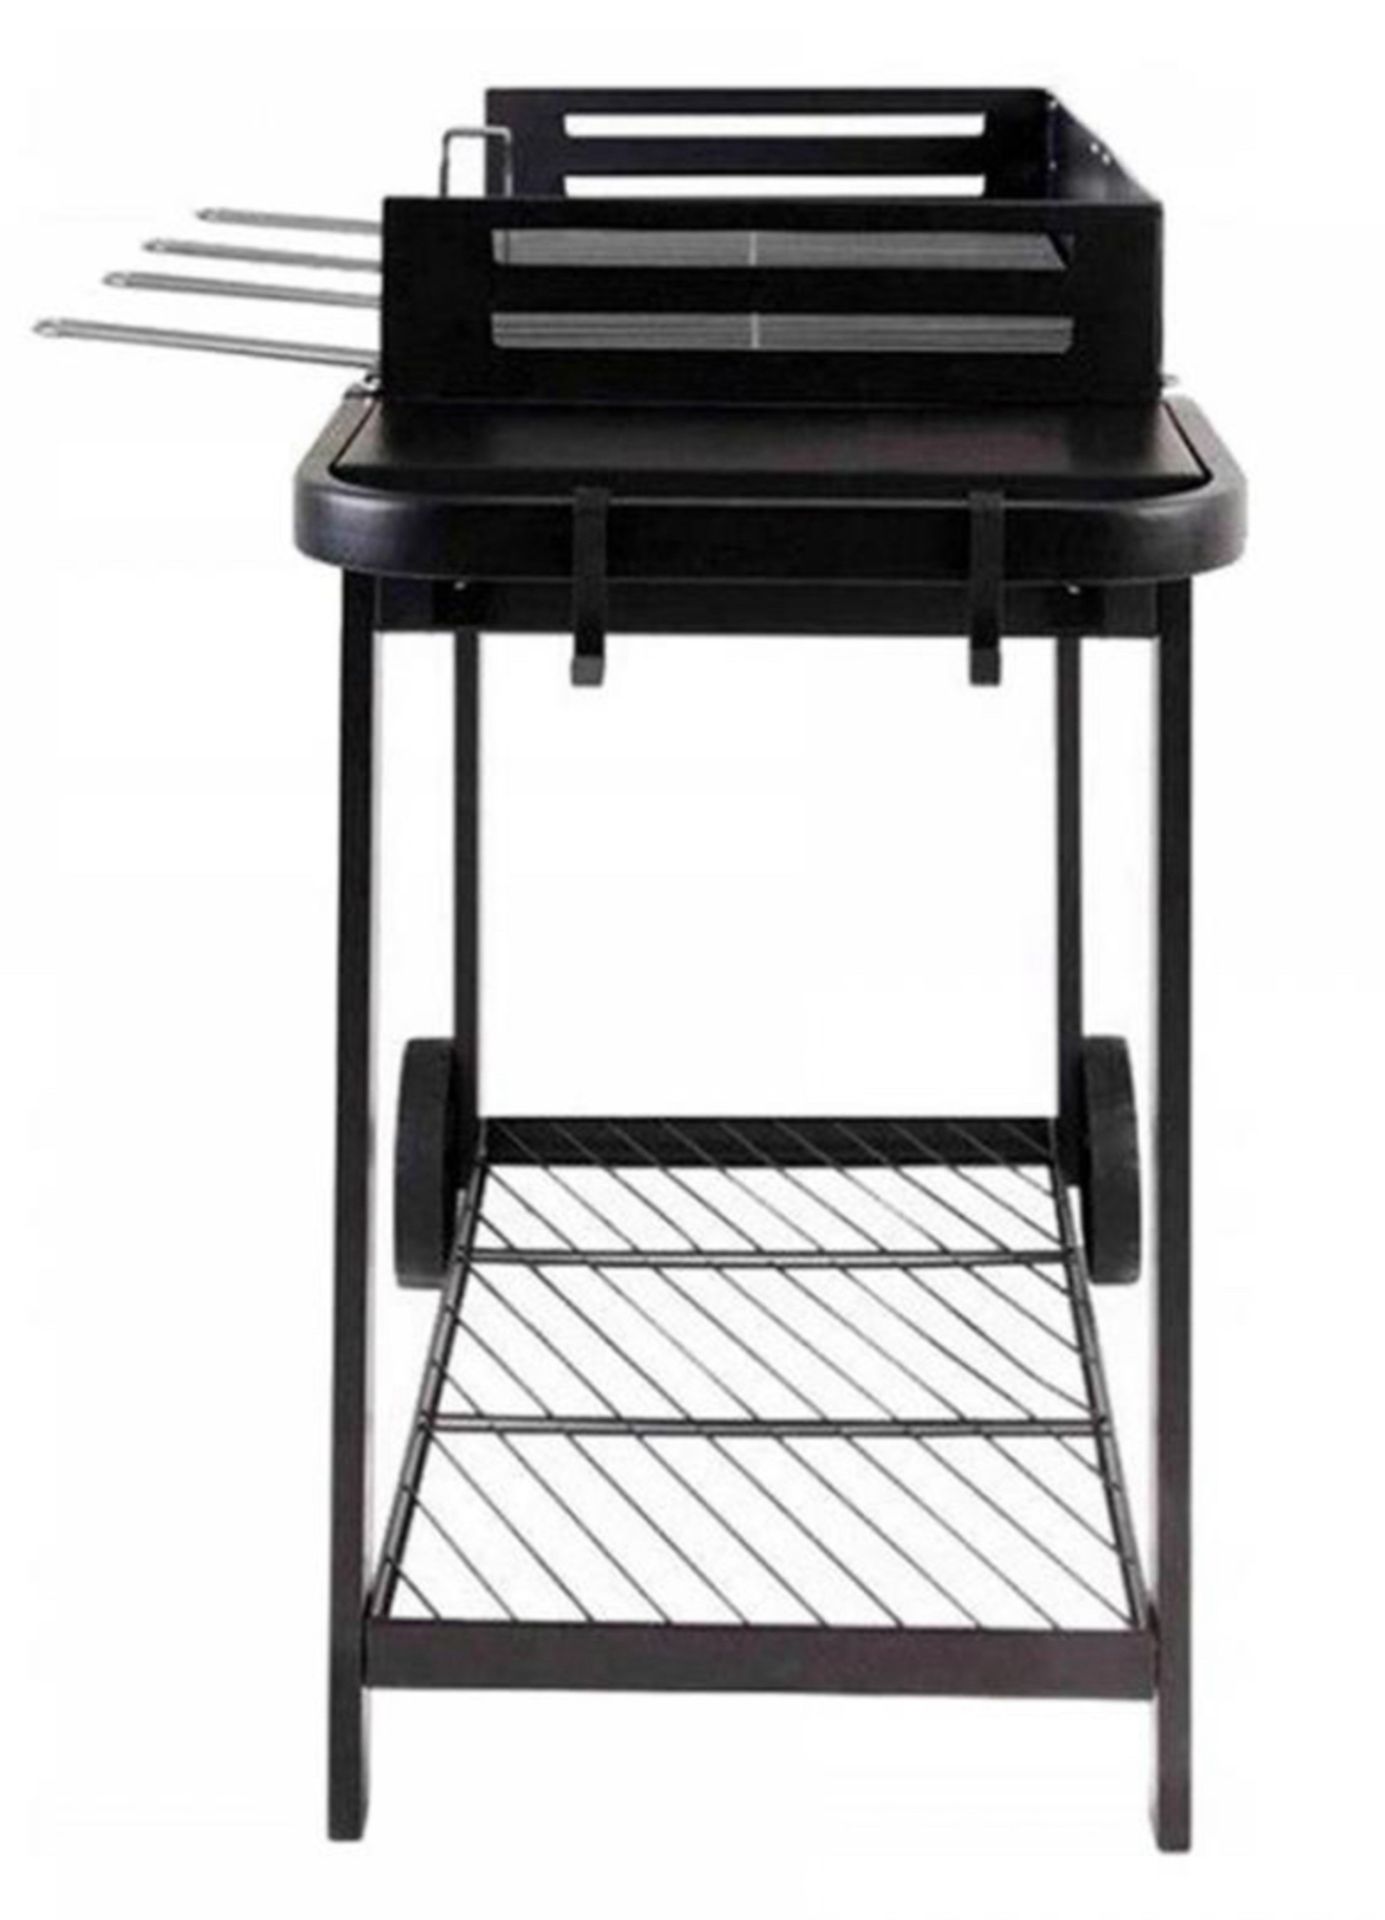 Zelfo BBQ Barbecue Grill with Stands - Brand New & Boxed - Image 4 of 7